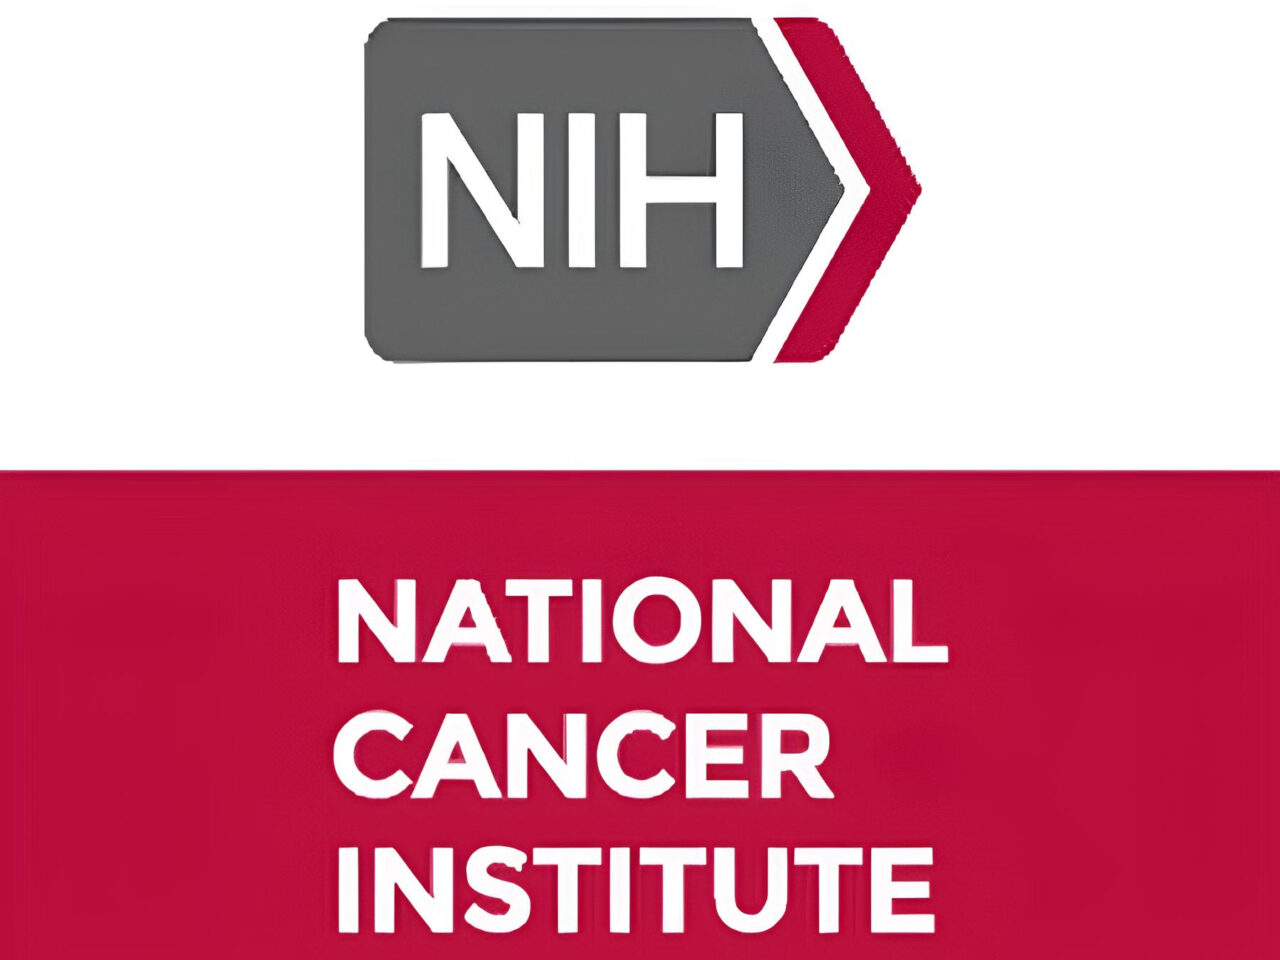 NCI Center for Cancer Research – Sandra Wolin, Steven Rosenberg, Giorgio Trinchieri from NCI CCR were elected into National Academy of Sciences